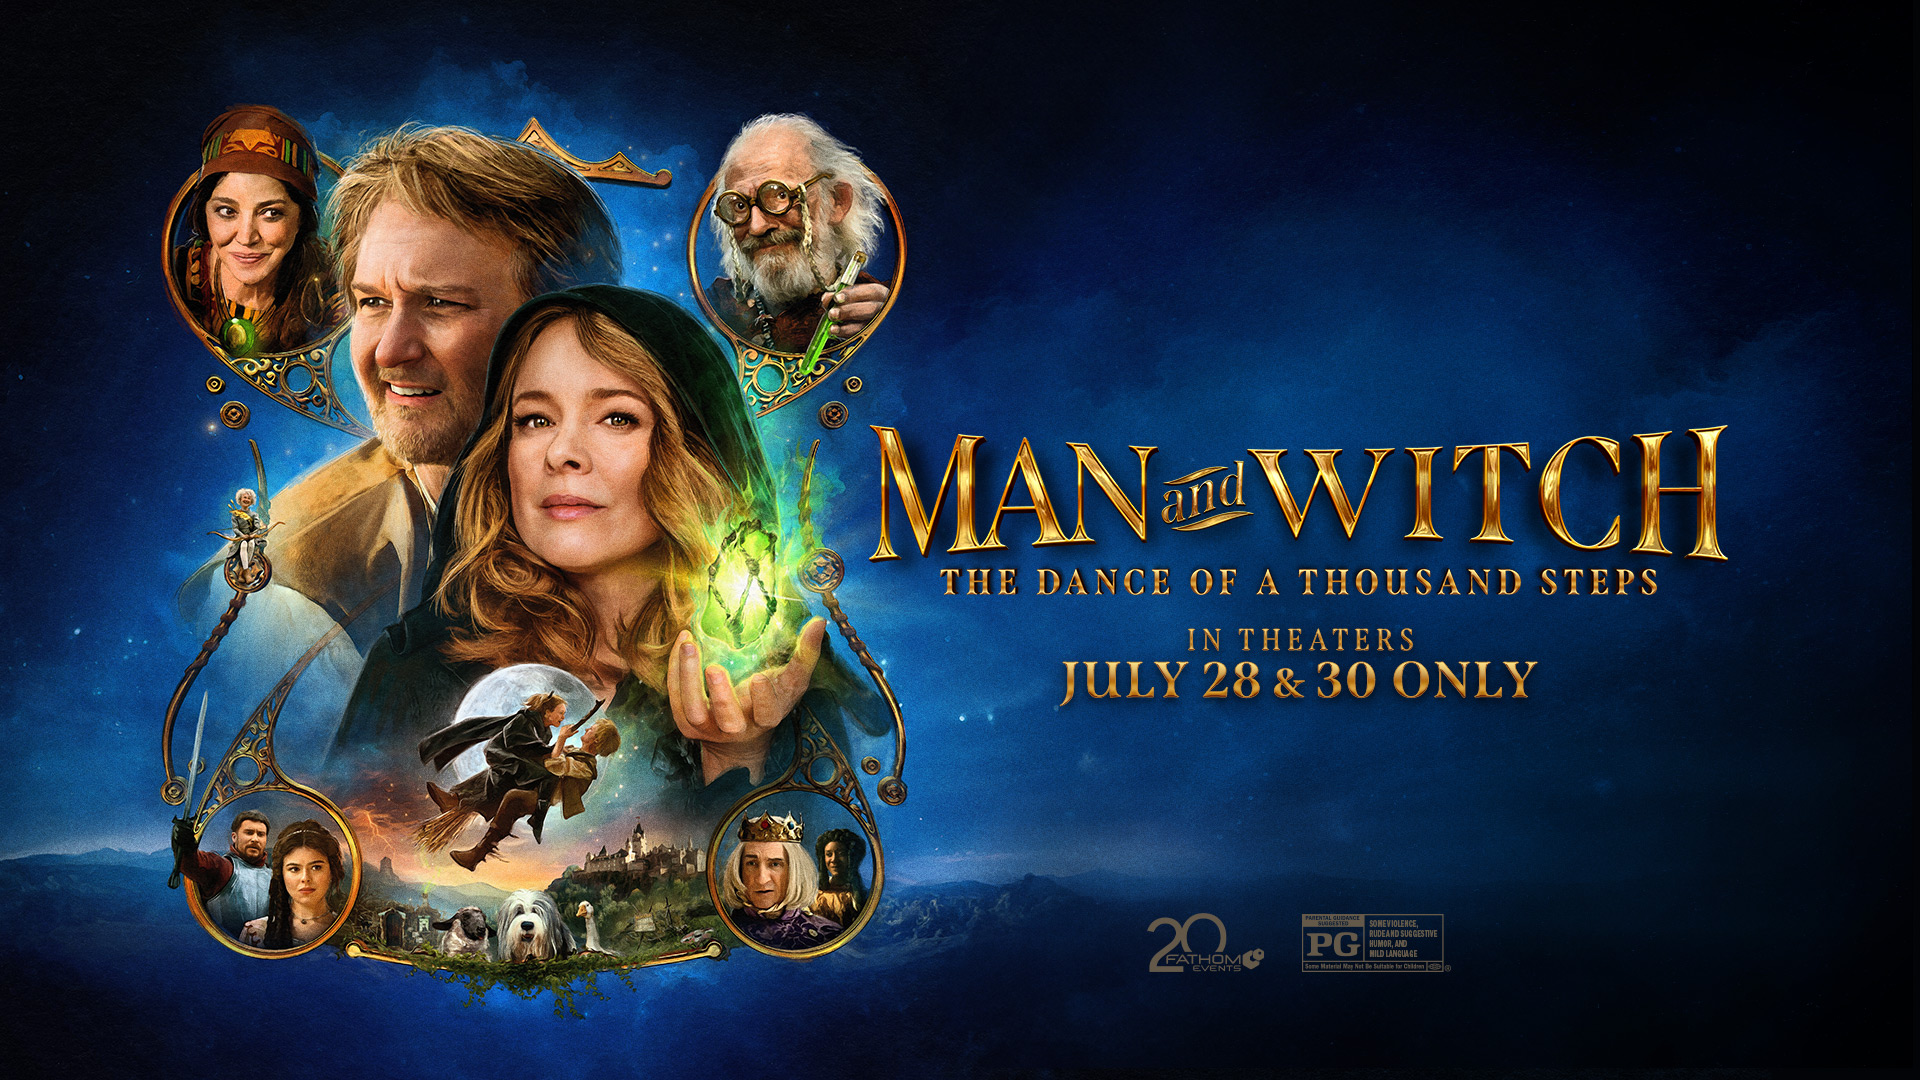 TICKETS ARE ON SALE NOW FOR THE FAMILY FANTASY THROWBACK “MAN AND WITCH”